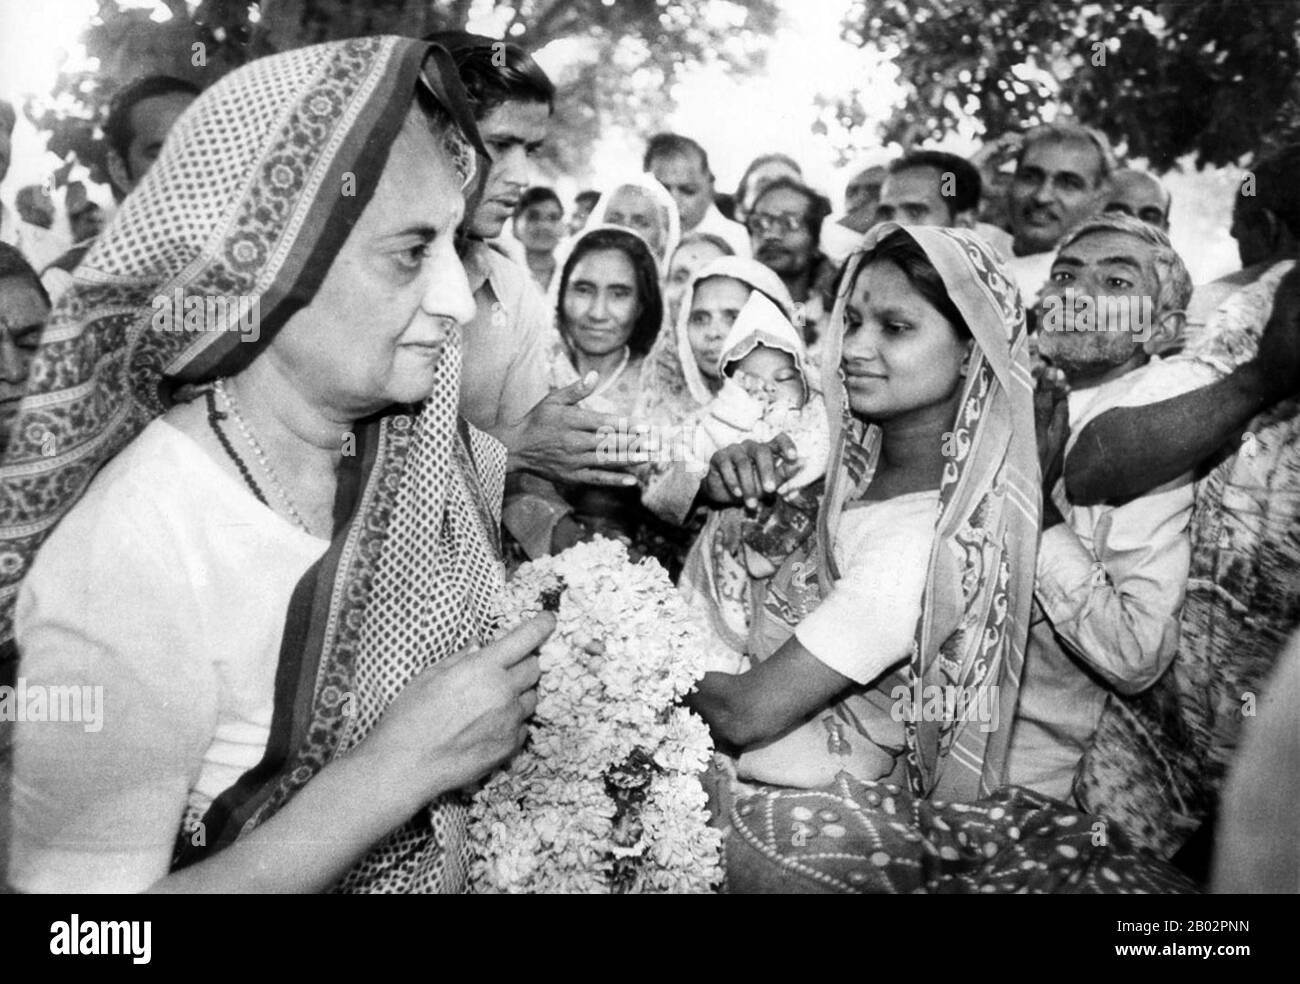 Indira Priyadarshini Gandhi (19 November 1917 – 31 October 1984) was the Prime Minister of the Republic of India for three consecutive terms from 1966 to 1977 and for a fourth term from 1980 until her assassination in 1984, a total of fifteen years.  She is India's only female prime minister to date. She is the world's all time longest serving female Prime Minister. Stock Photo